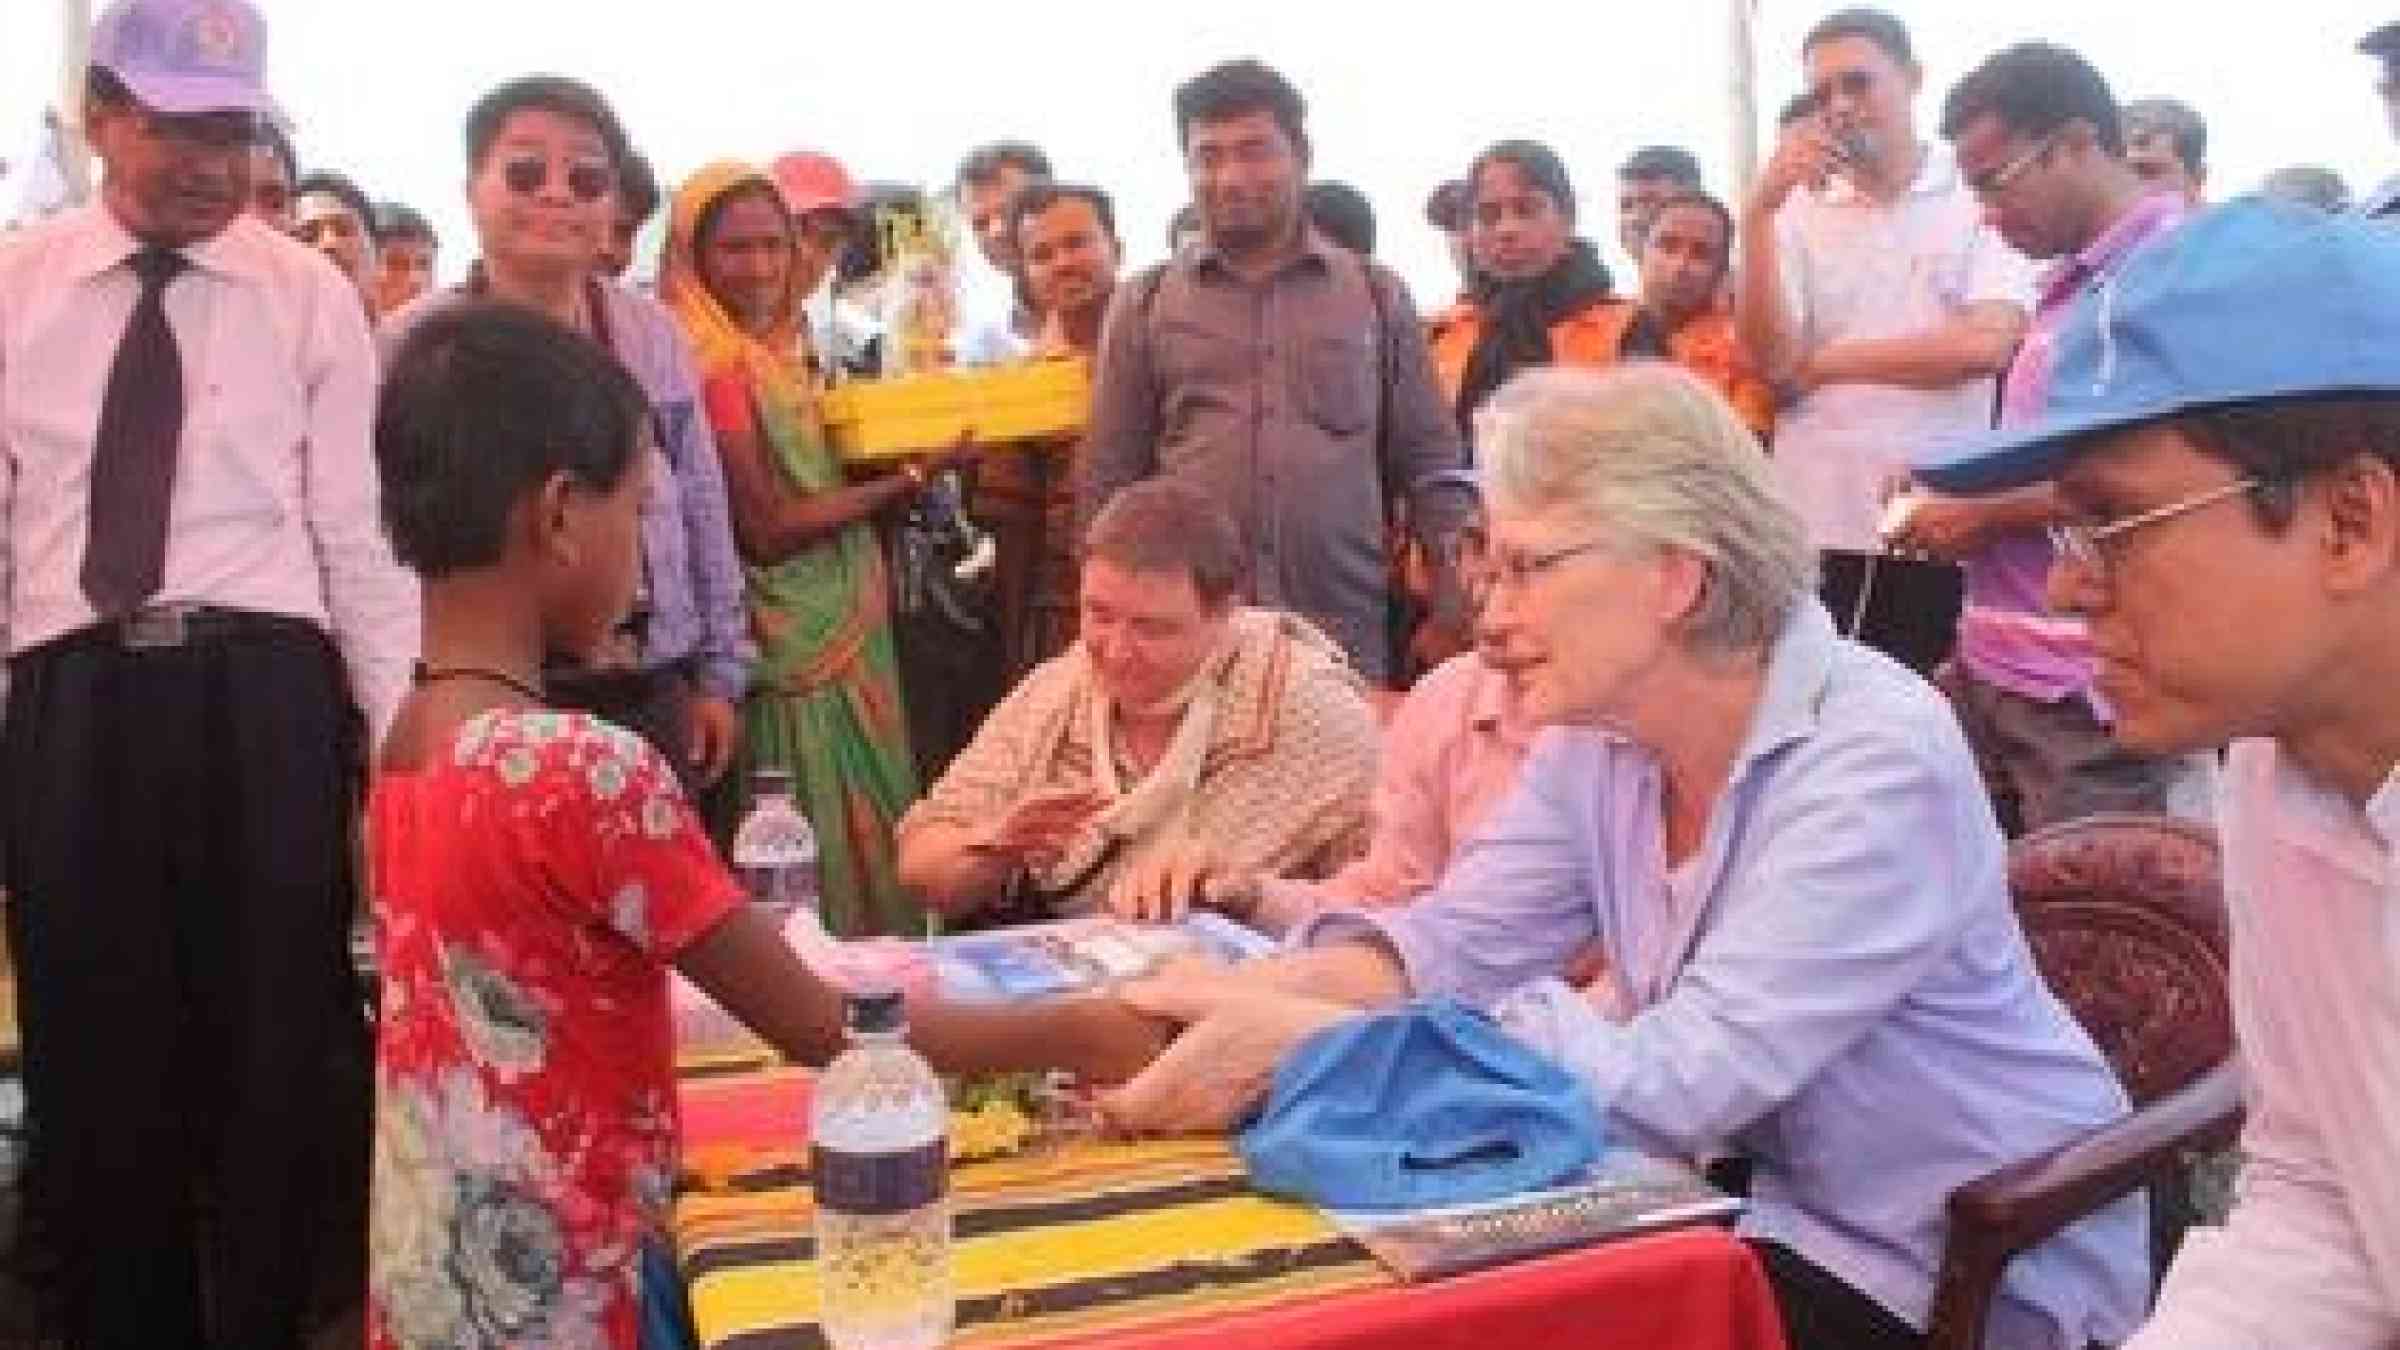 Margareta Wahlström, UNISDR Chief and Special Representative of the Secretary-General for Disaster Risk Reduction, shakes the hand of a child in Bainpara, Bangladesh